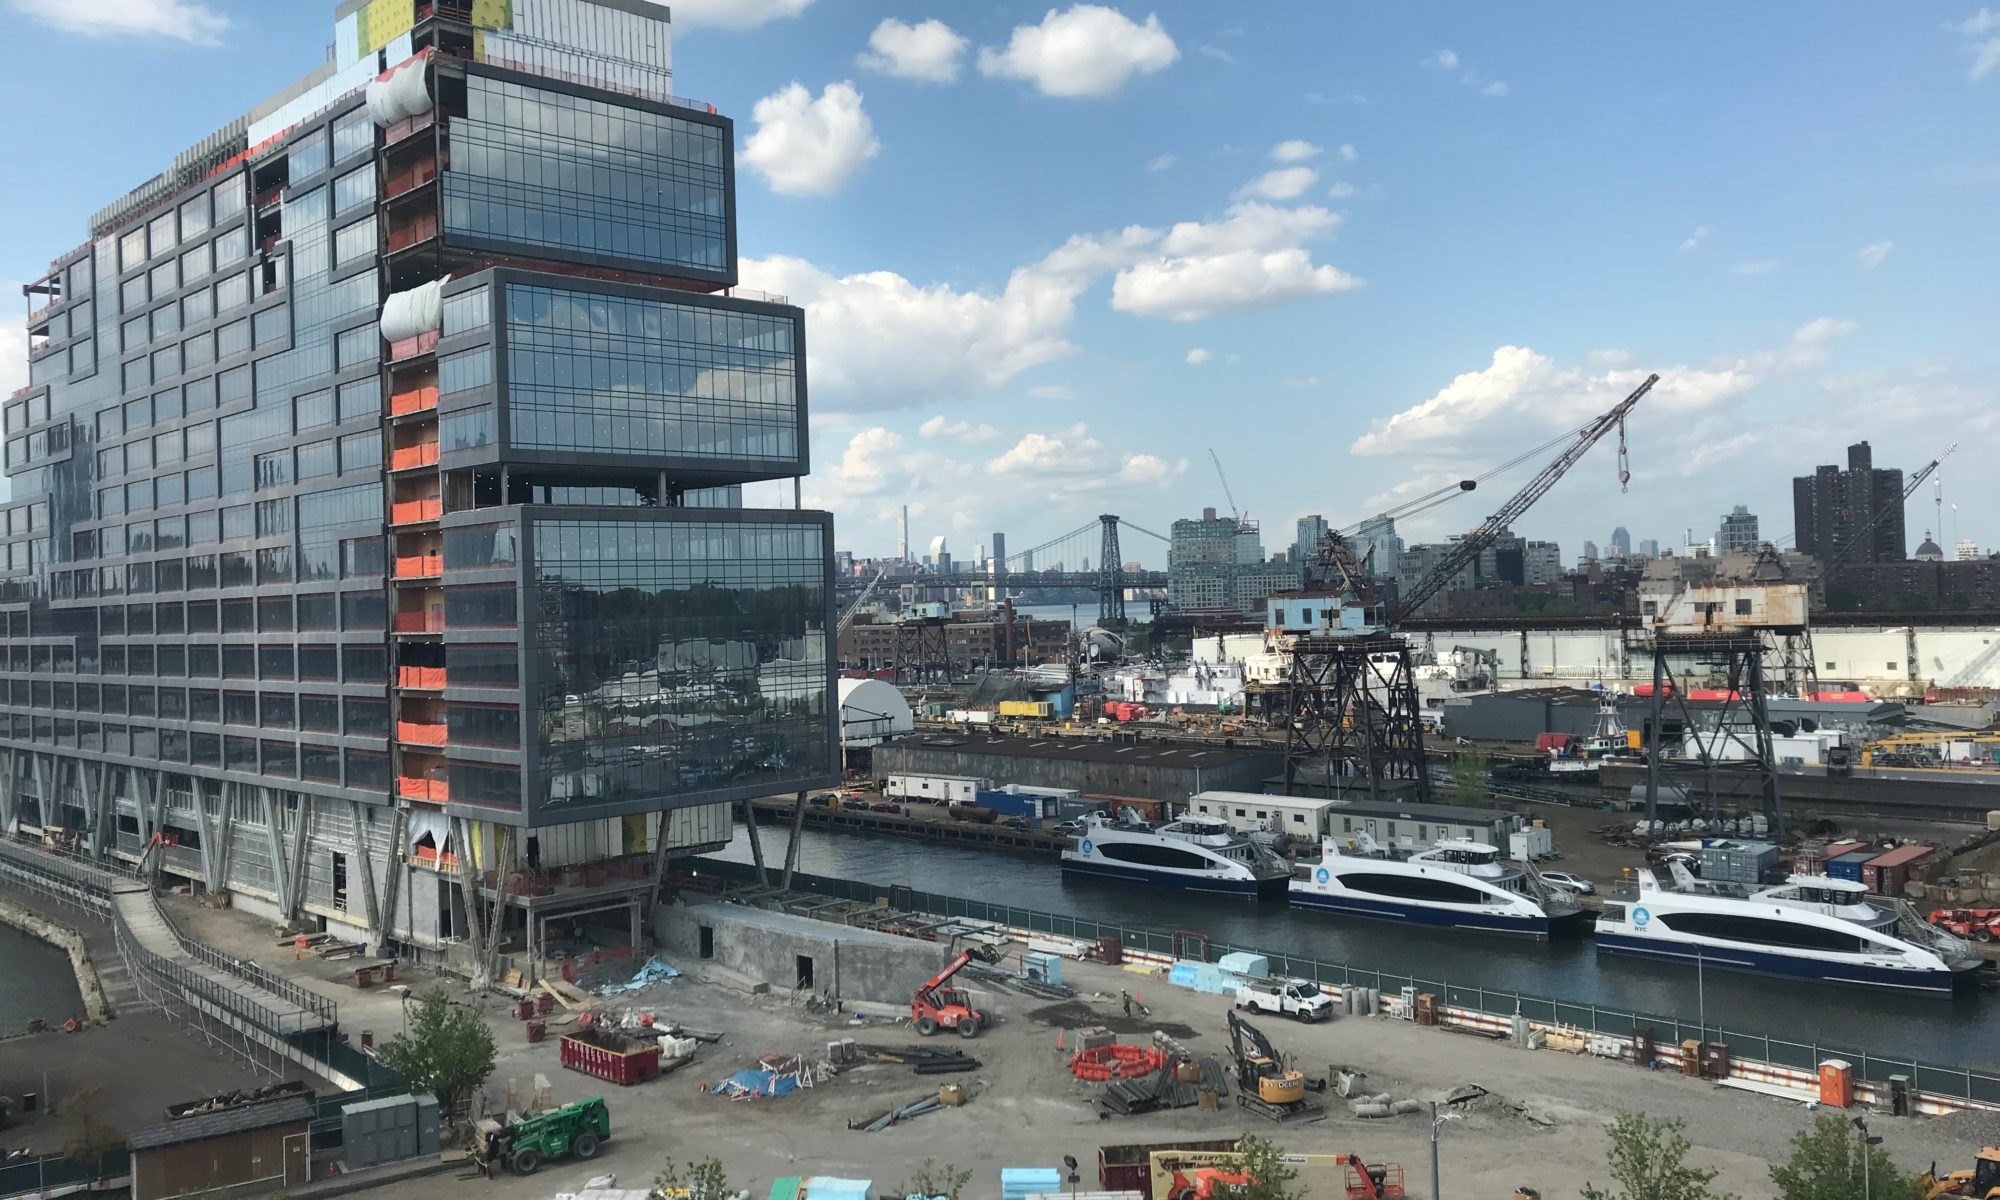 A tall glass office building on a pier next to NYC ferries in a wet berth with ship repair cranes and the Williamsburg Bridge in the background